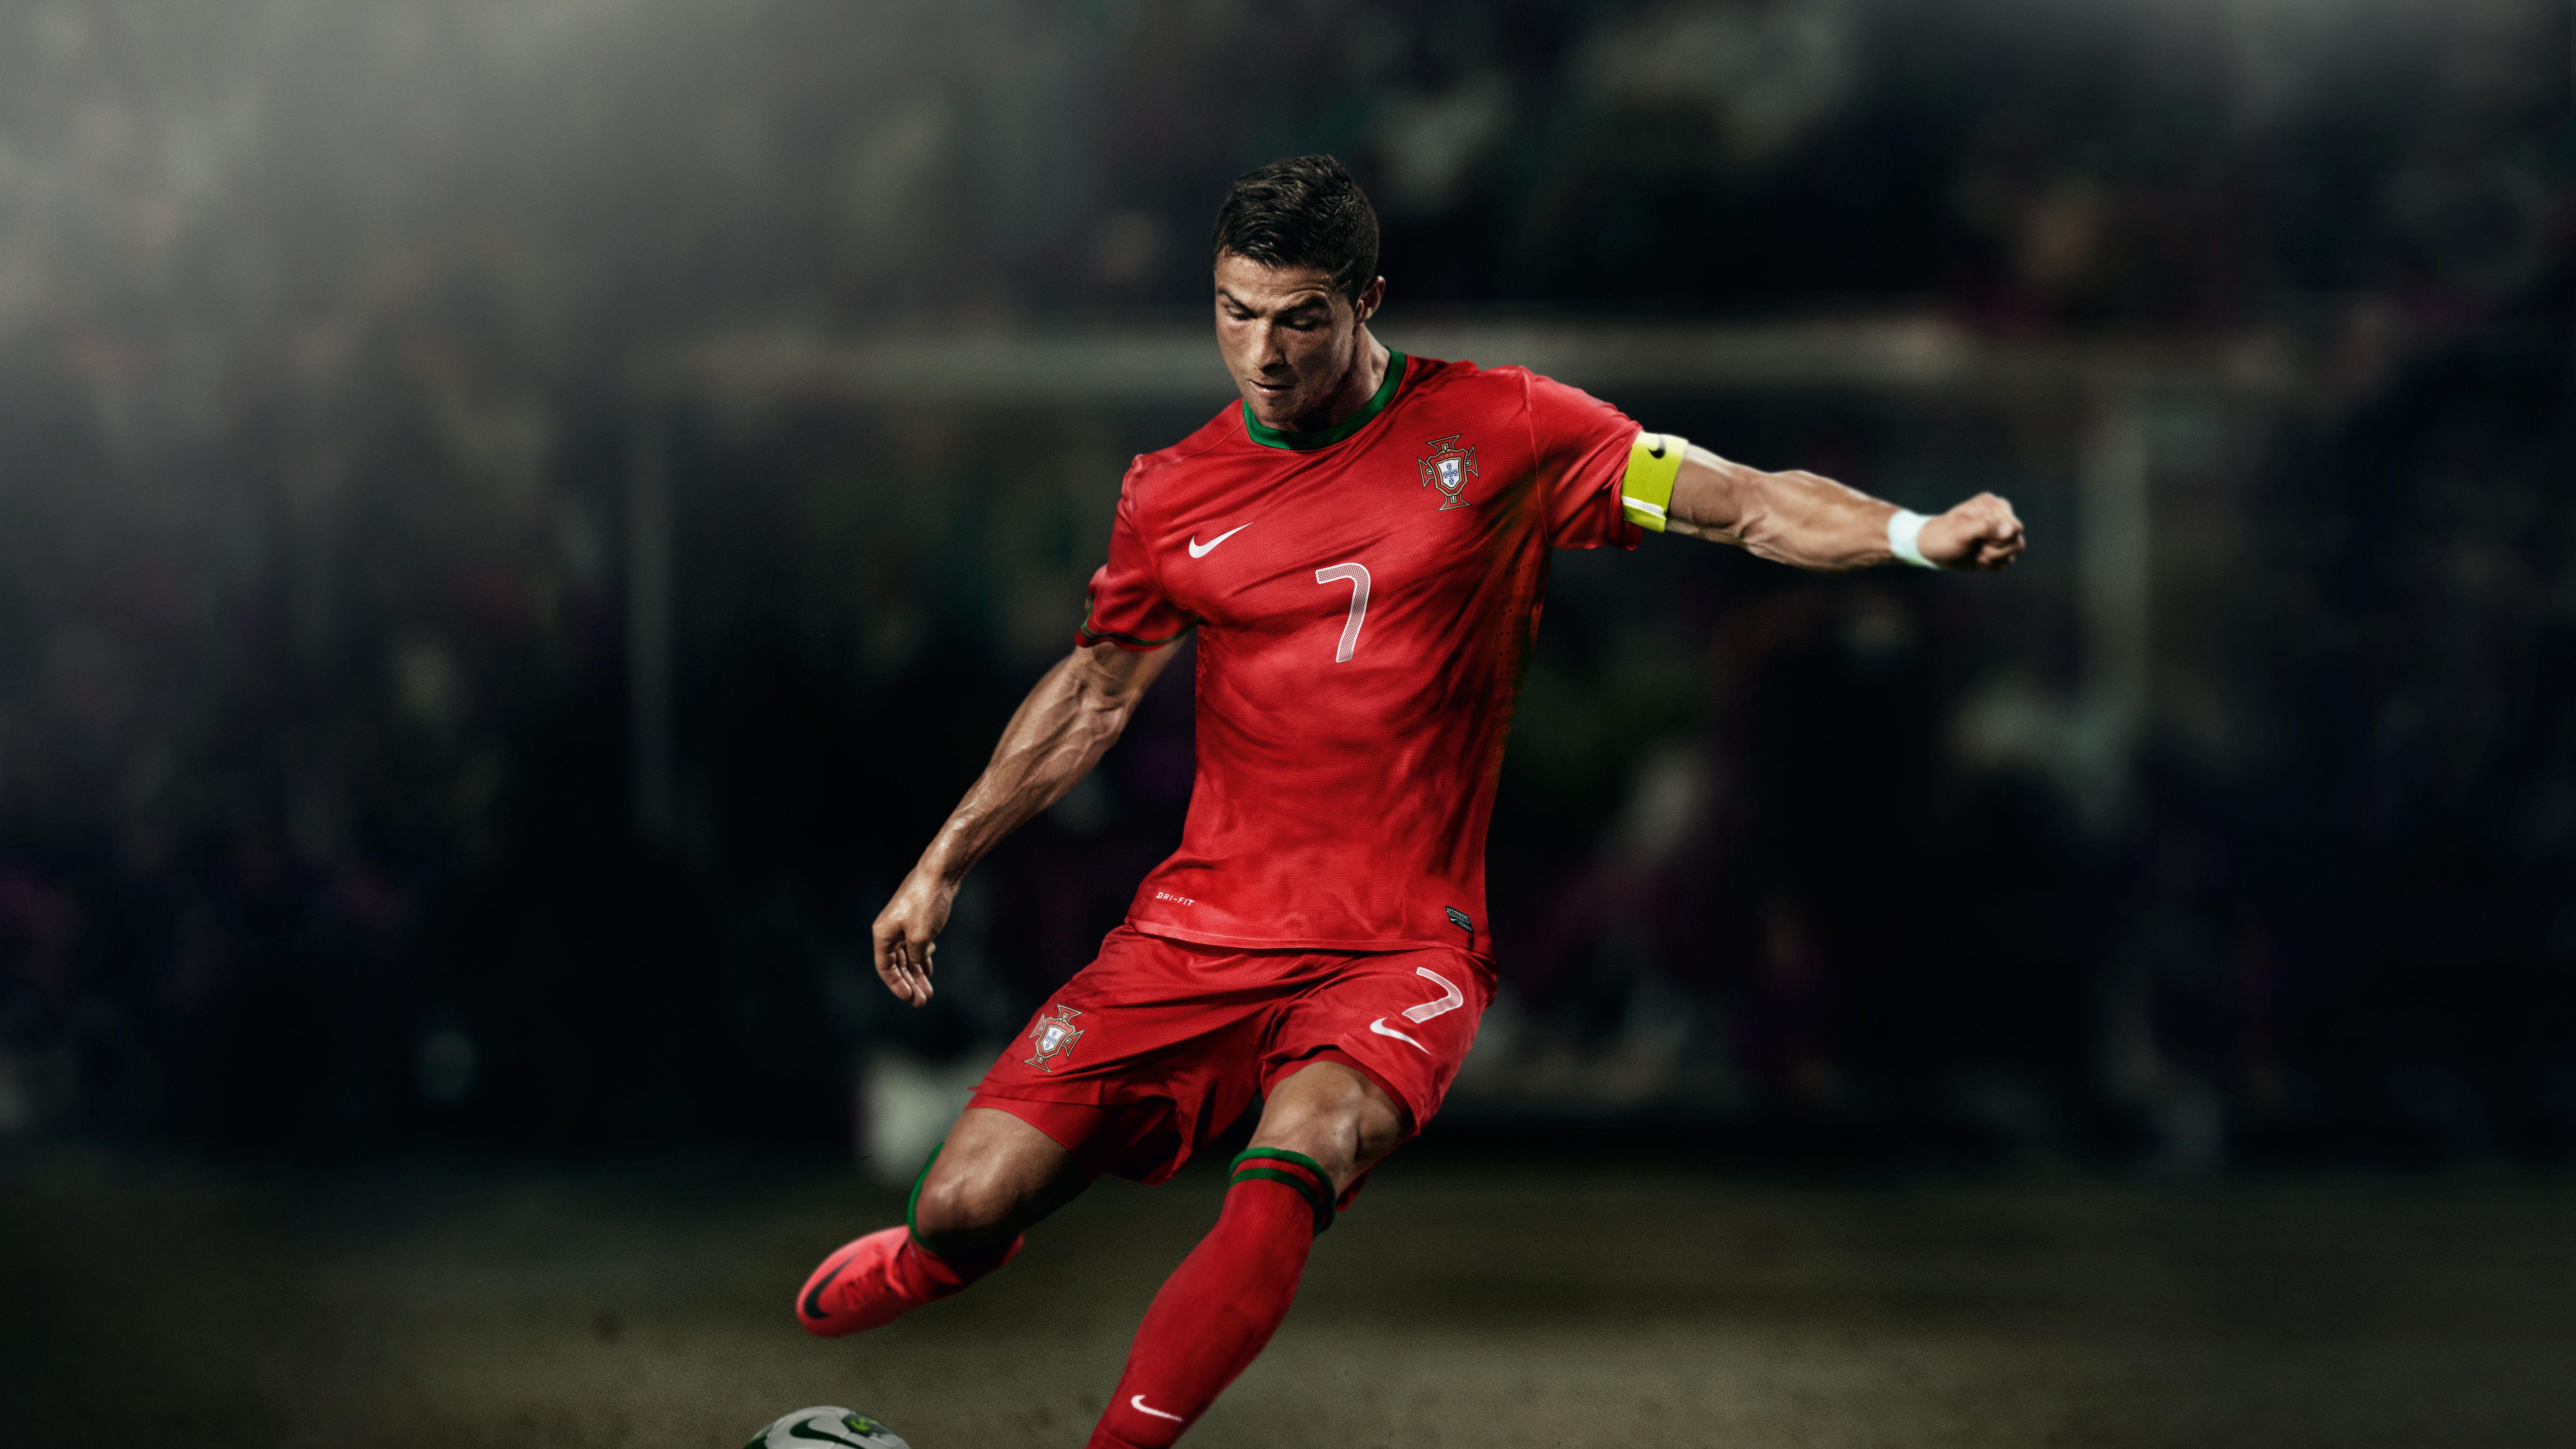 Wallpaper Cristiano Ronaldo, Soccer, Football player, 4K, Sports,. Wallpaper for iPhone, Android, Mobile and Desktop